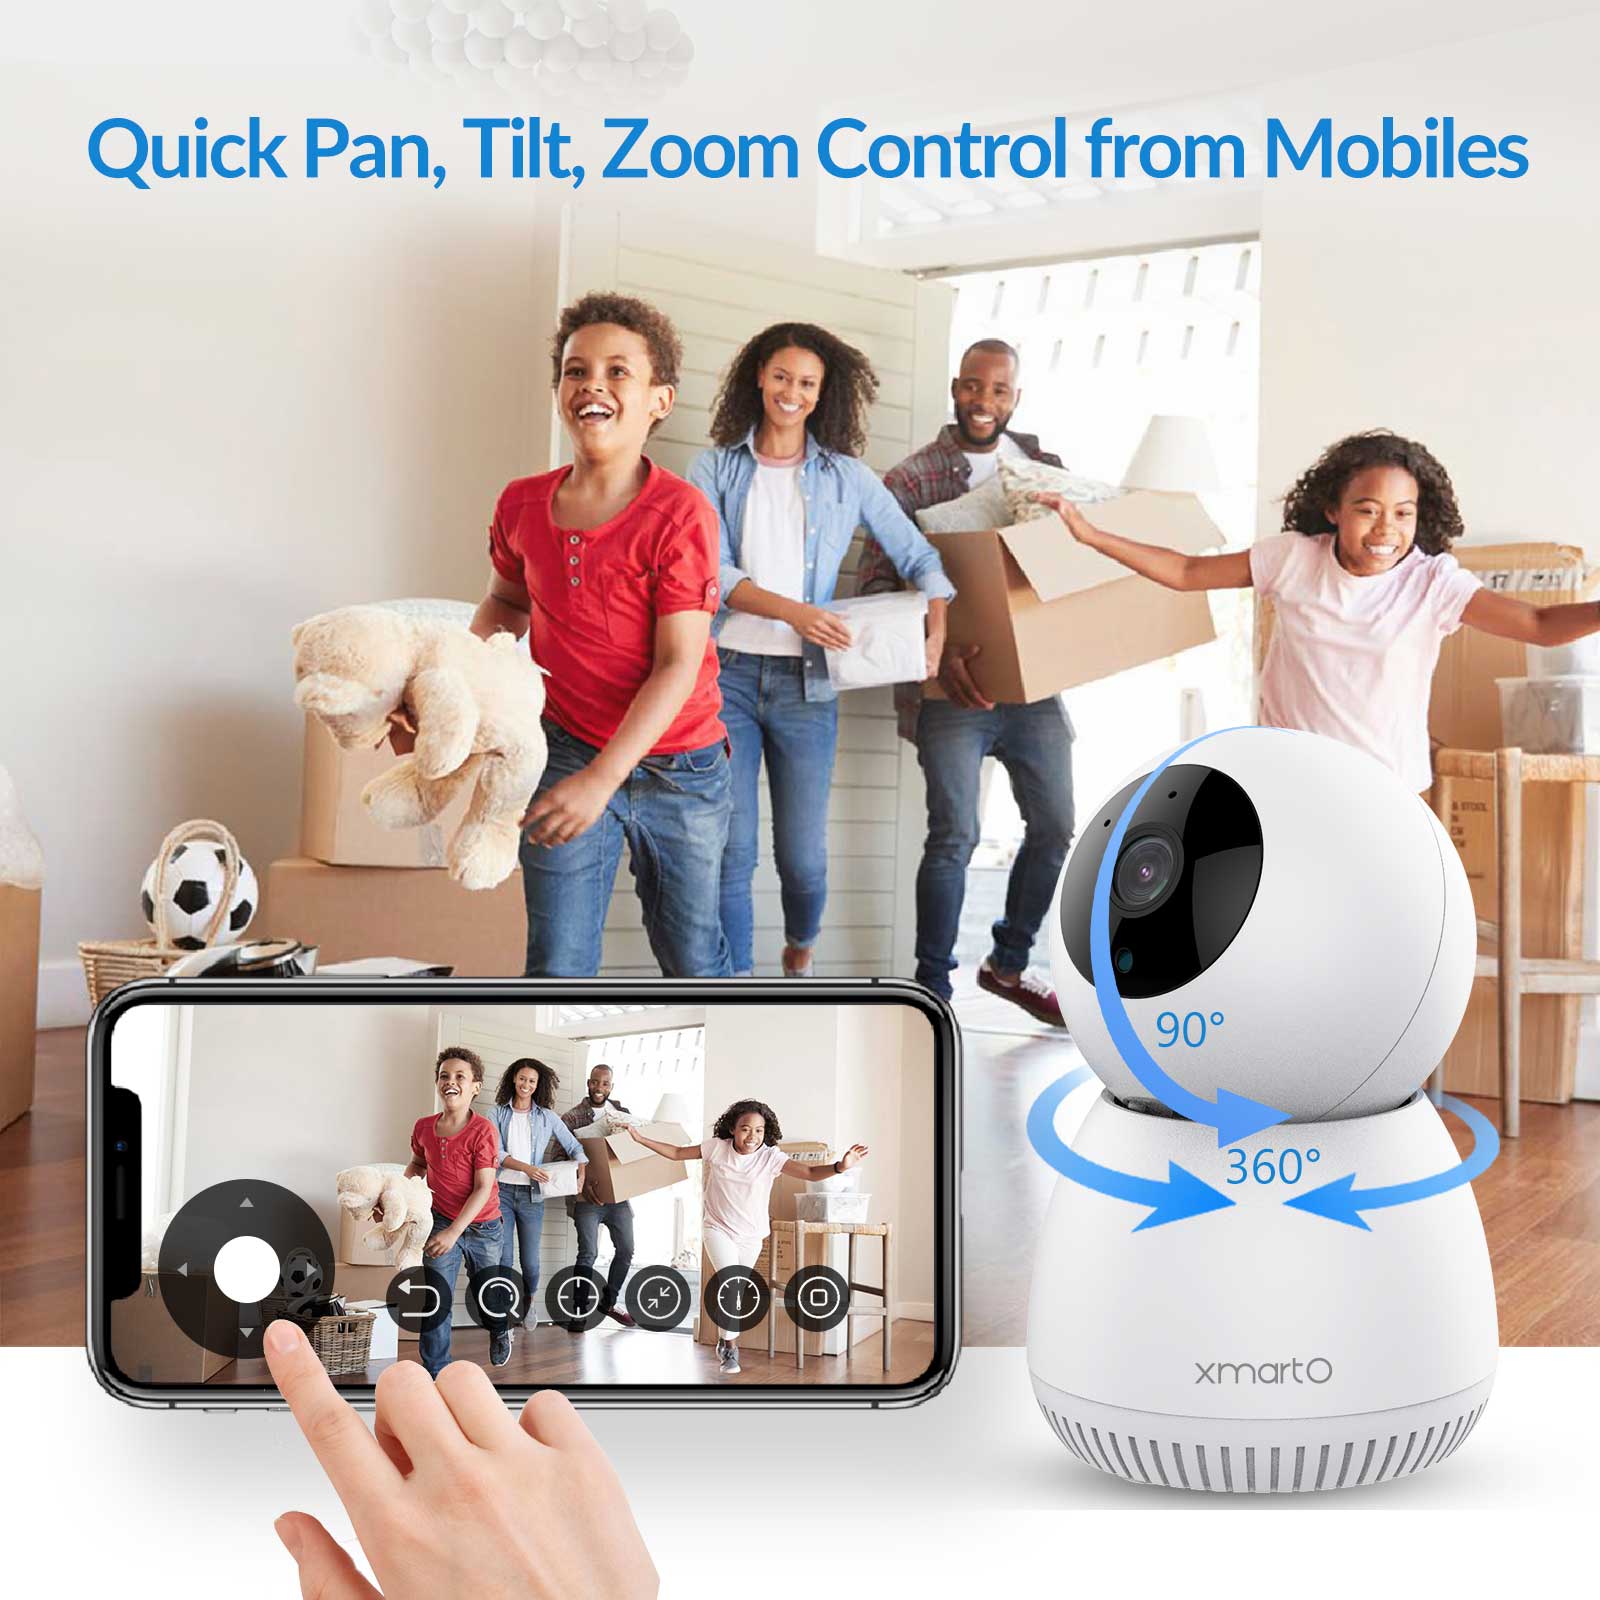 TP-Link Tapo 1080P Indoor Security Camera for Baby Monitor, Dog Camera w/  Motion Detection, 2-Way Audio Siren, Night Vision, Cloud & SD Card Storage